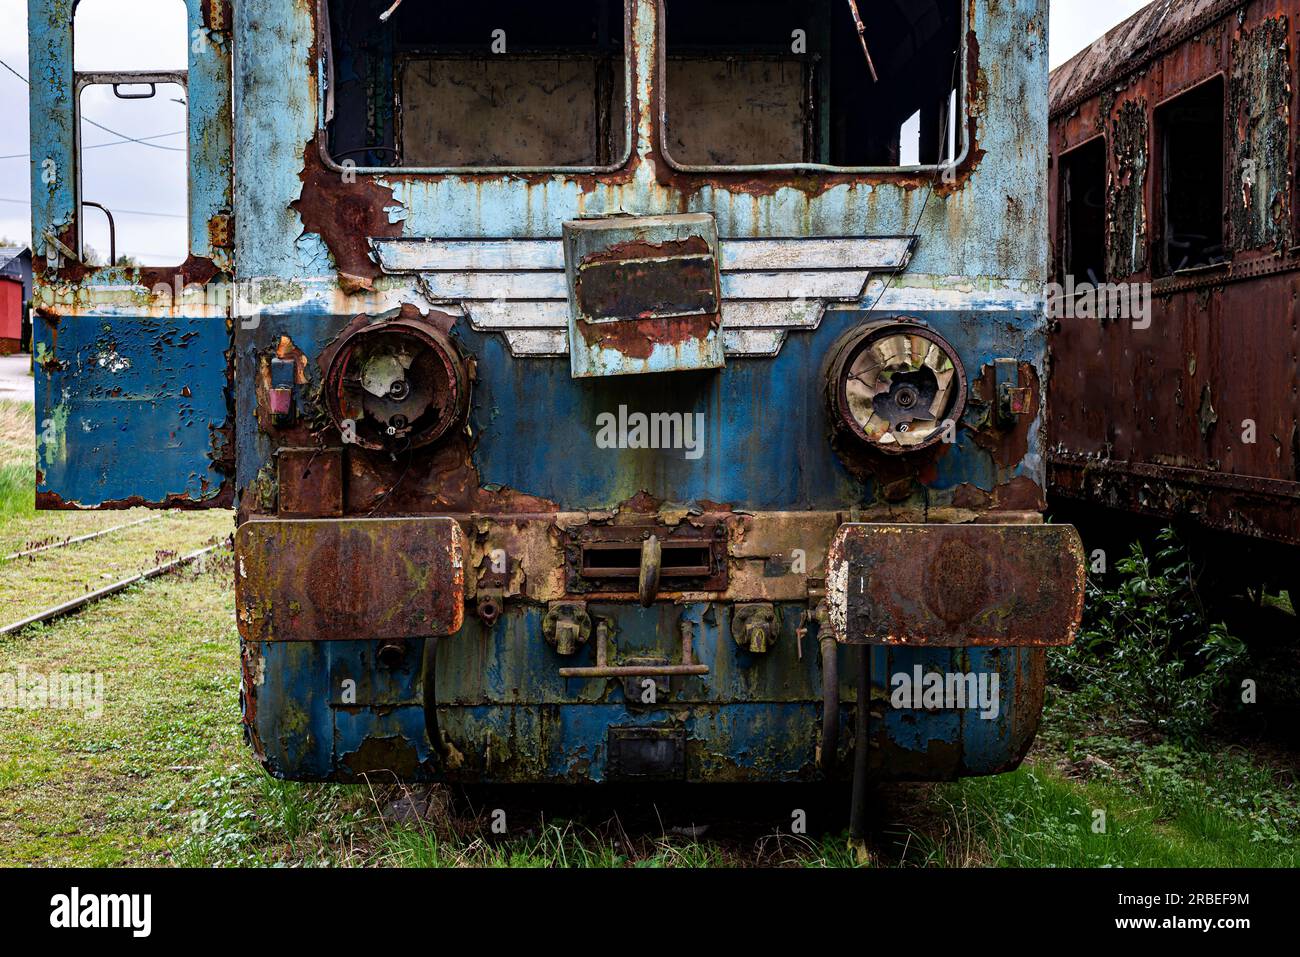 Old rusty electric multiple unit train decommissioned and abandoned on railway siding on green grassy field Stock Photo